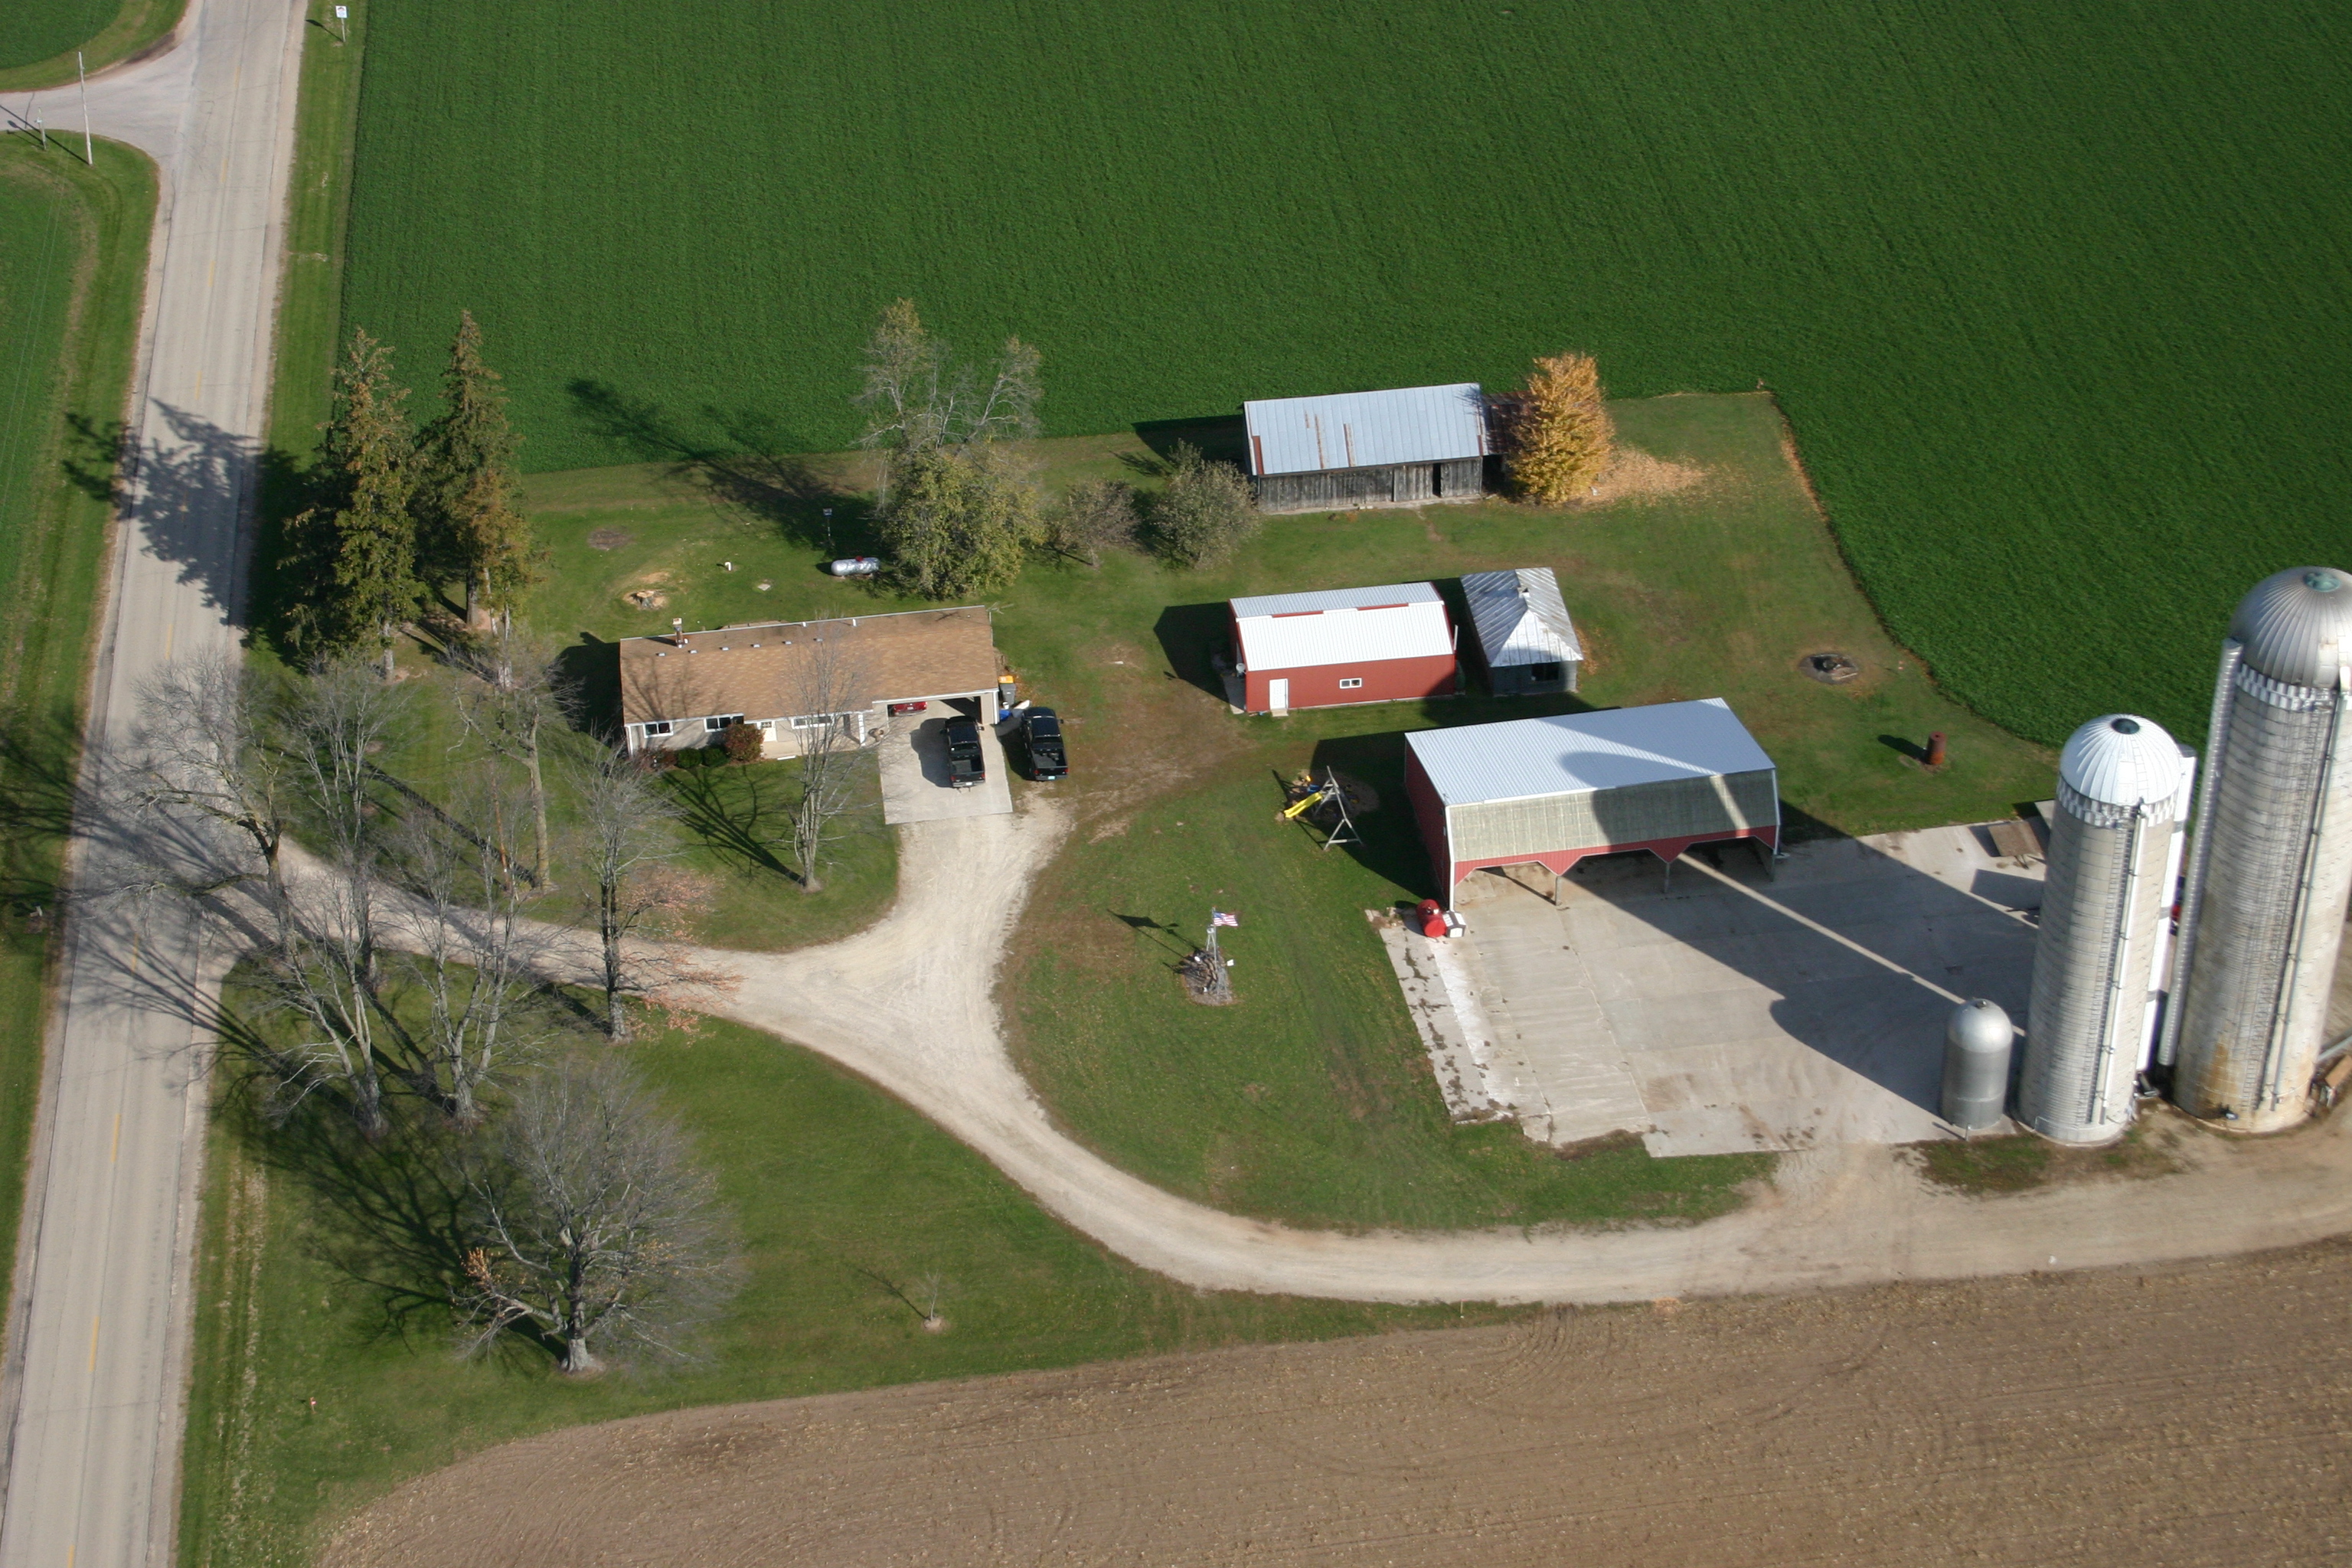 Taken by Ron Brooks of employee's home (look at the different shades of green between alfalfa and grass)